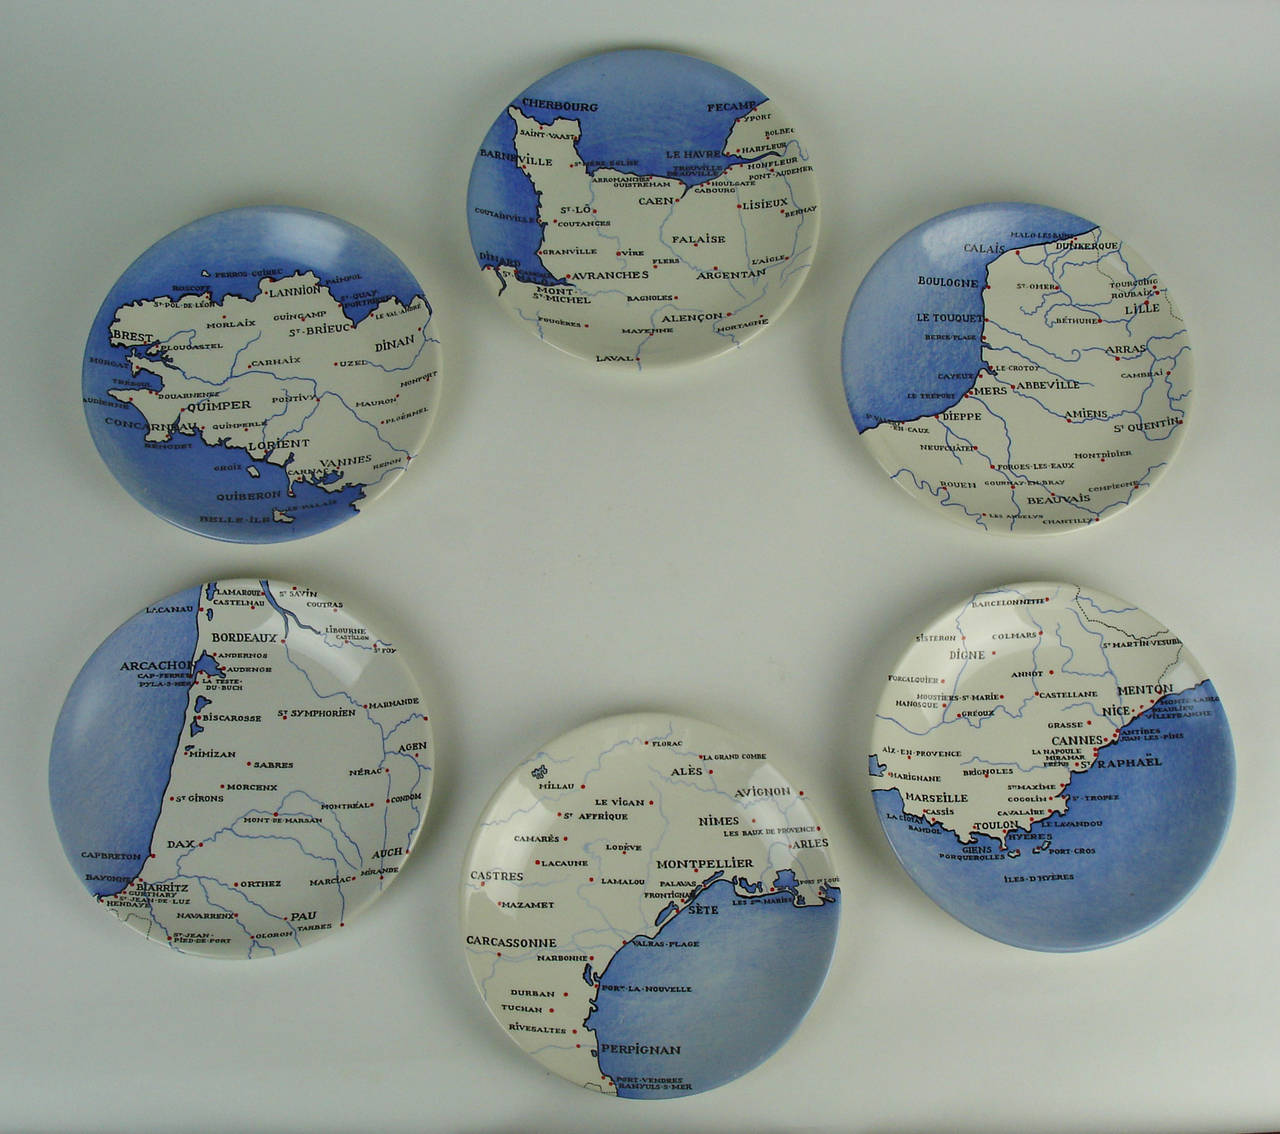 Six ceramic plates representing six different maps of the French coast. These plates were created by Colette Gueden for Primavera and manufactured by Keller & Guerin, circa 1950. Same plates p 478 in Primavera 1912-1972 atelier d'art du Printemps by